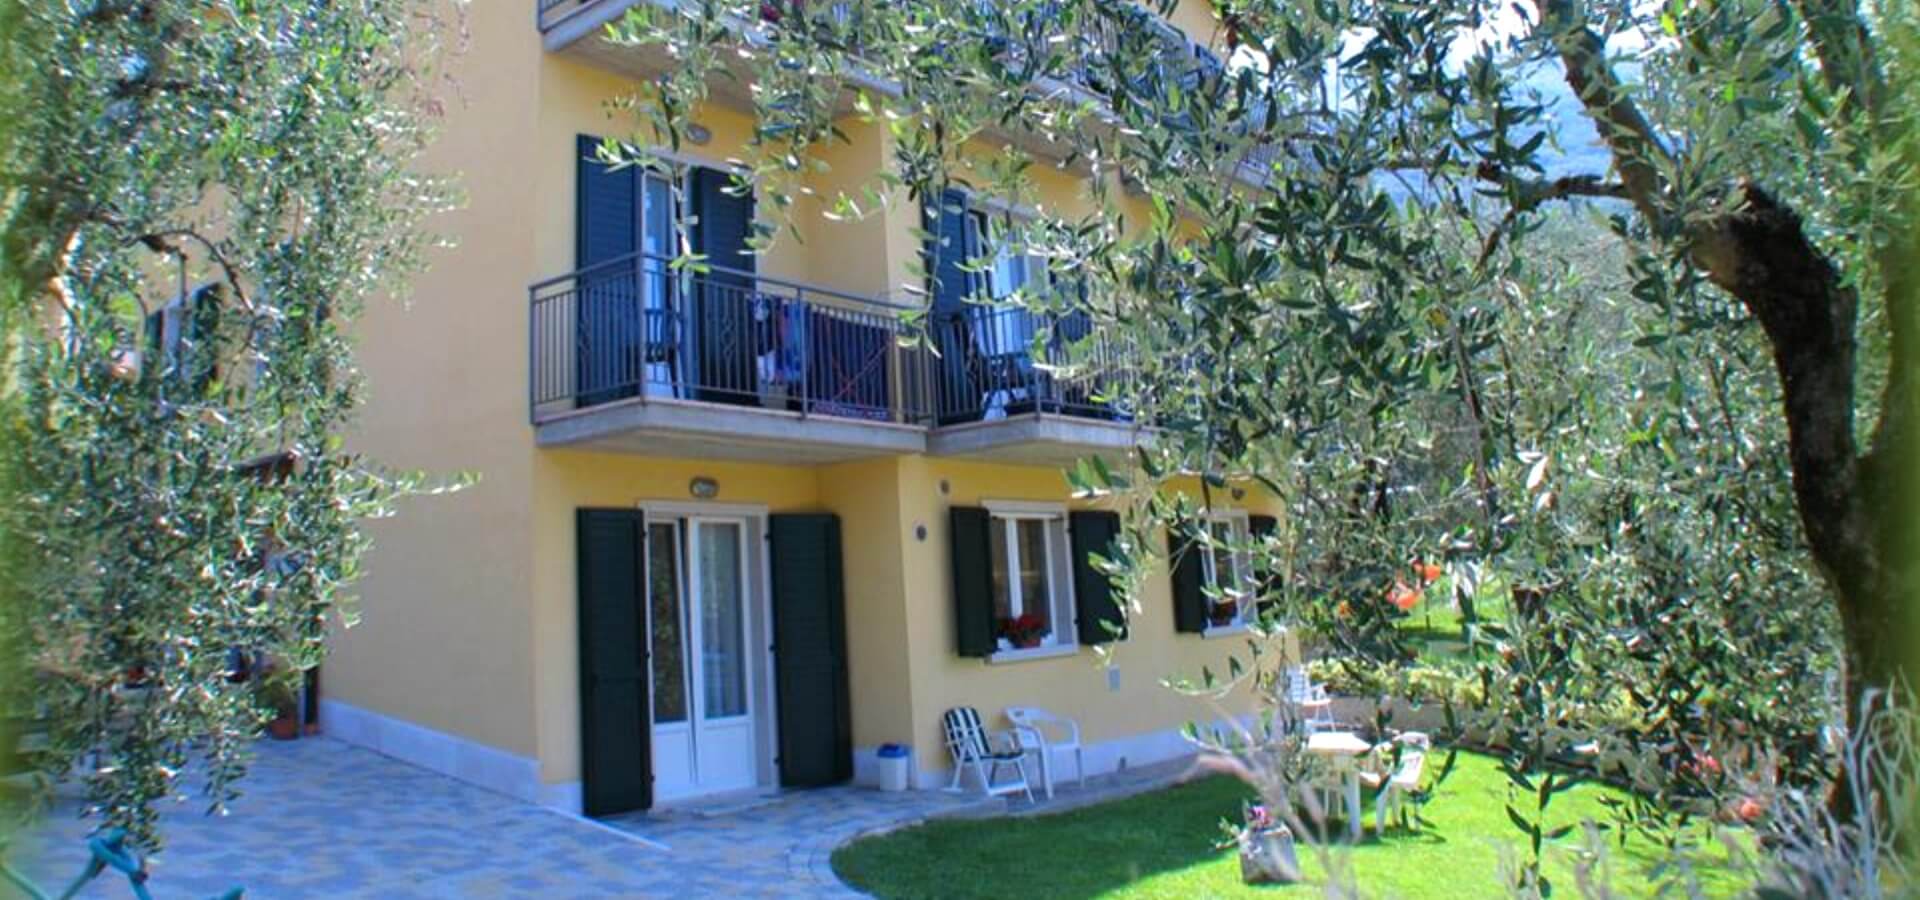 Photos of Apartments Andreis in Malcesine with balcony overlooking the lake, garden and pool